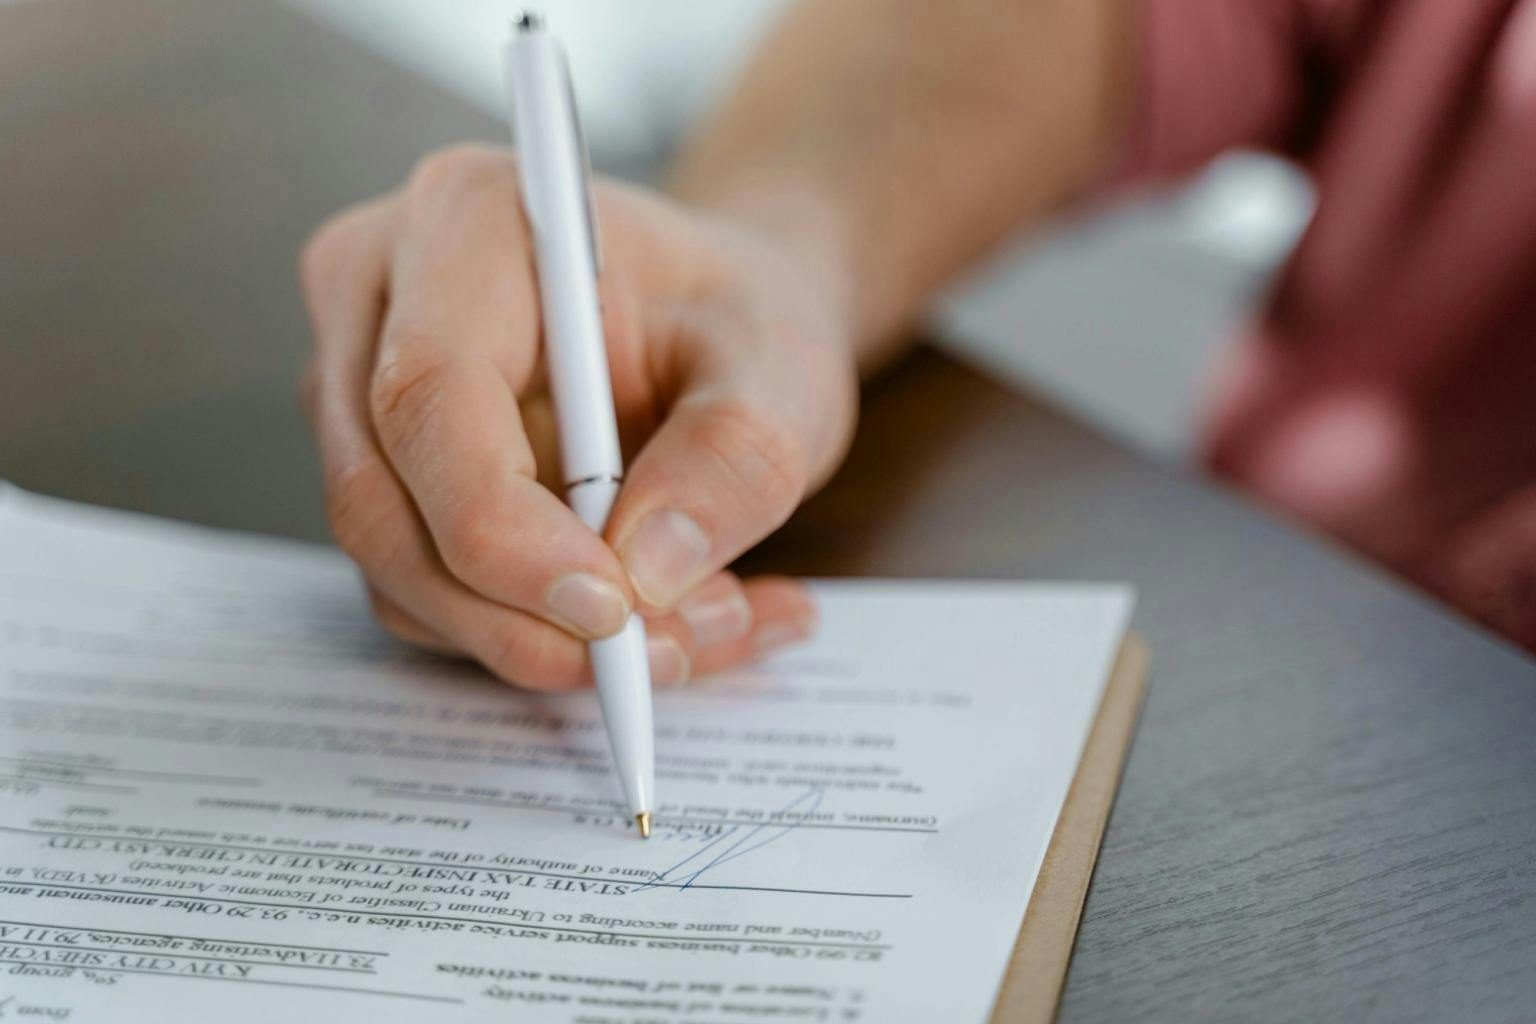 A hand holding a pen and signing a document